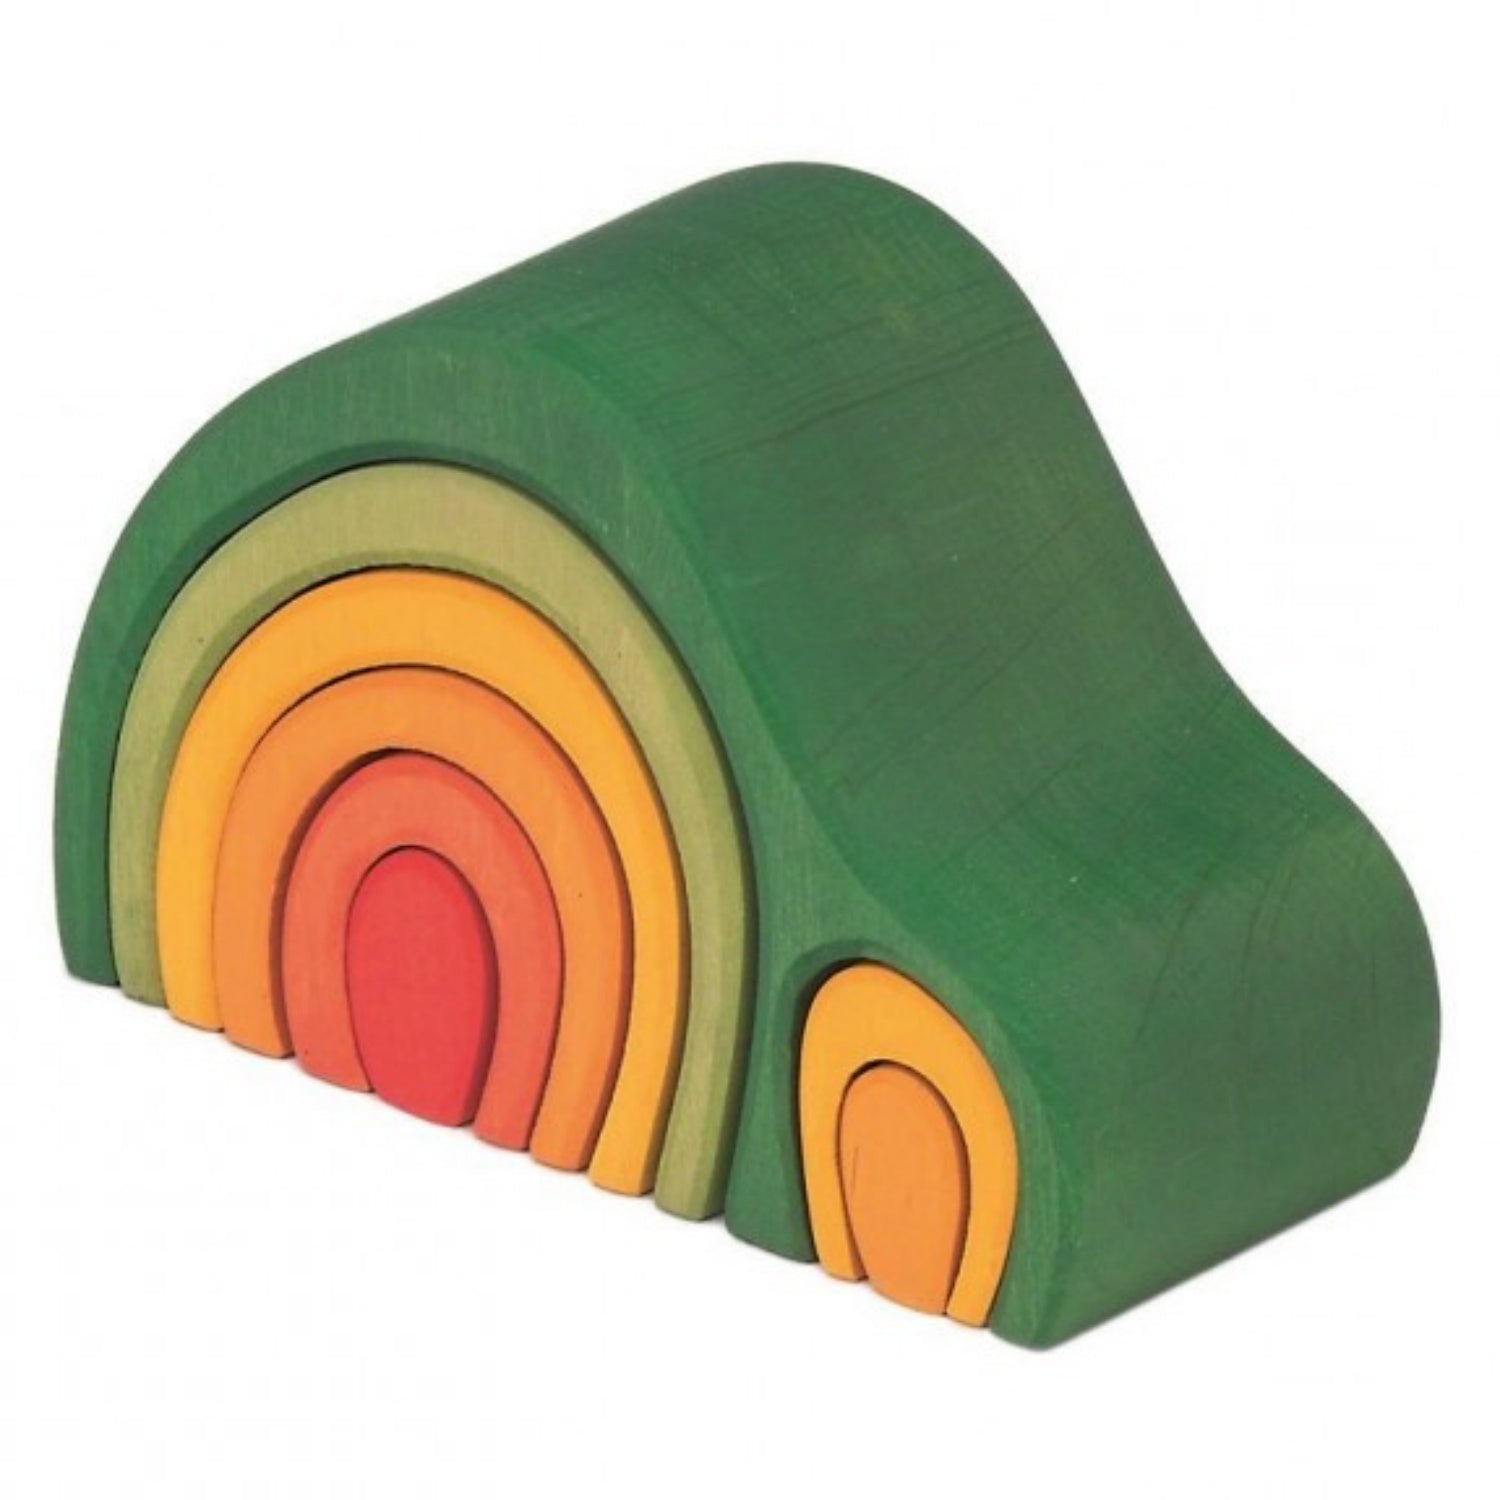 Gluckskafer Green Wooden Arch House Stacker | Imaginative Play Wooden Toys | Waldorf Education and Montessori Education | Left Side View | BeoVERDE.ie